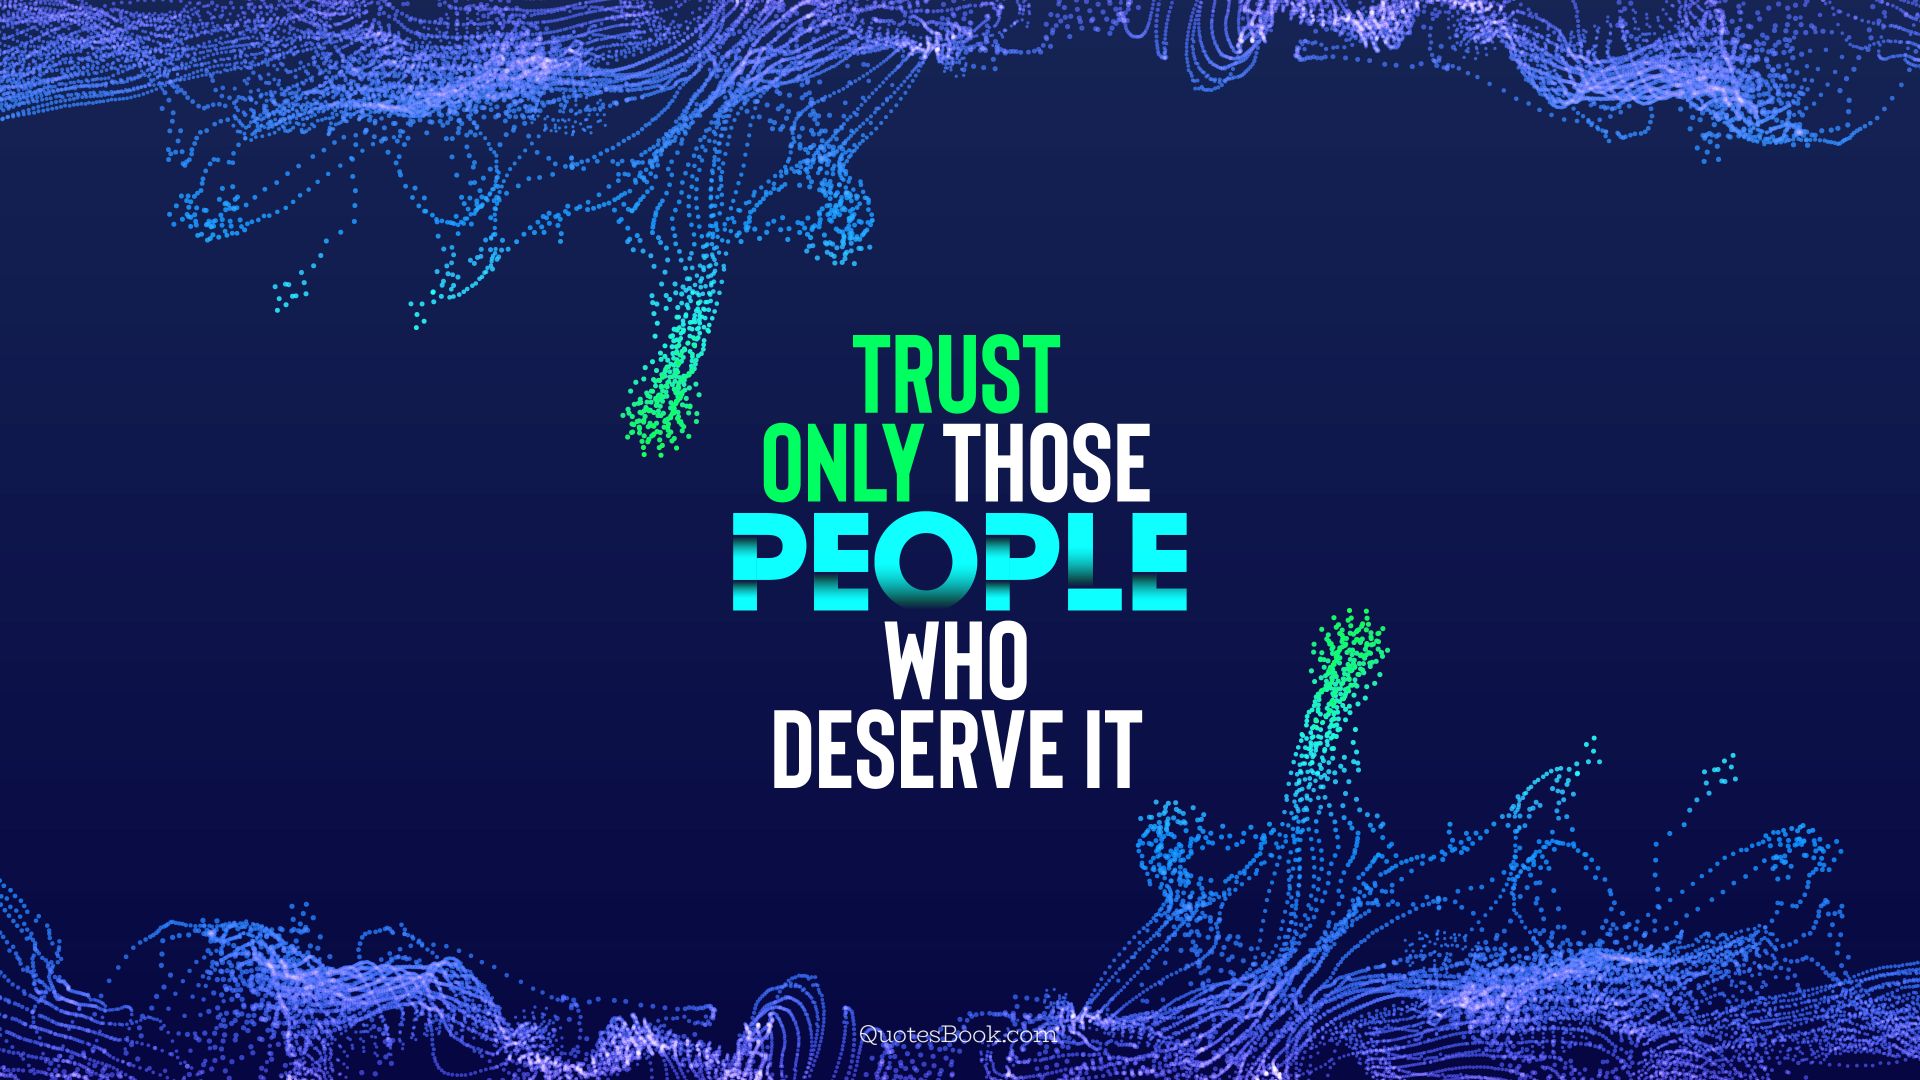 Trust only those people, who deserve it. - Quote by QuotesBook